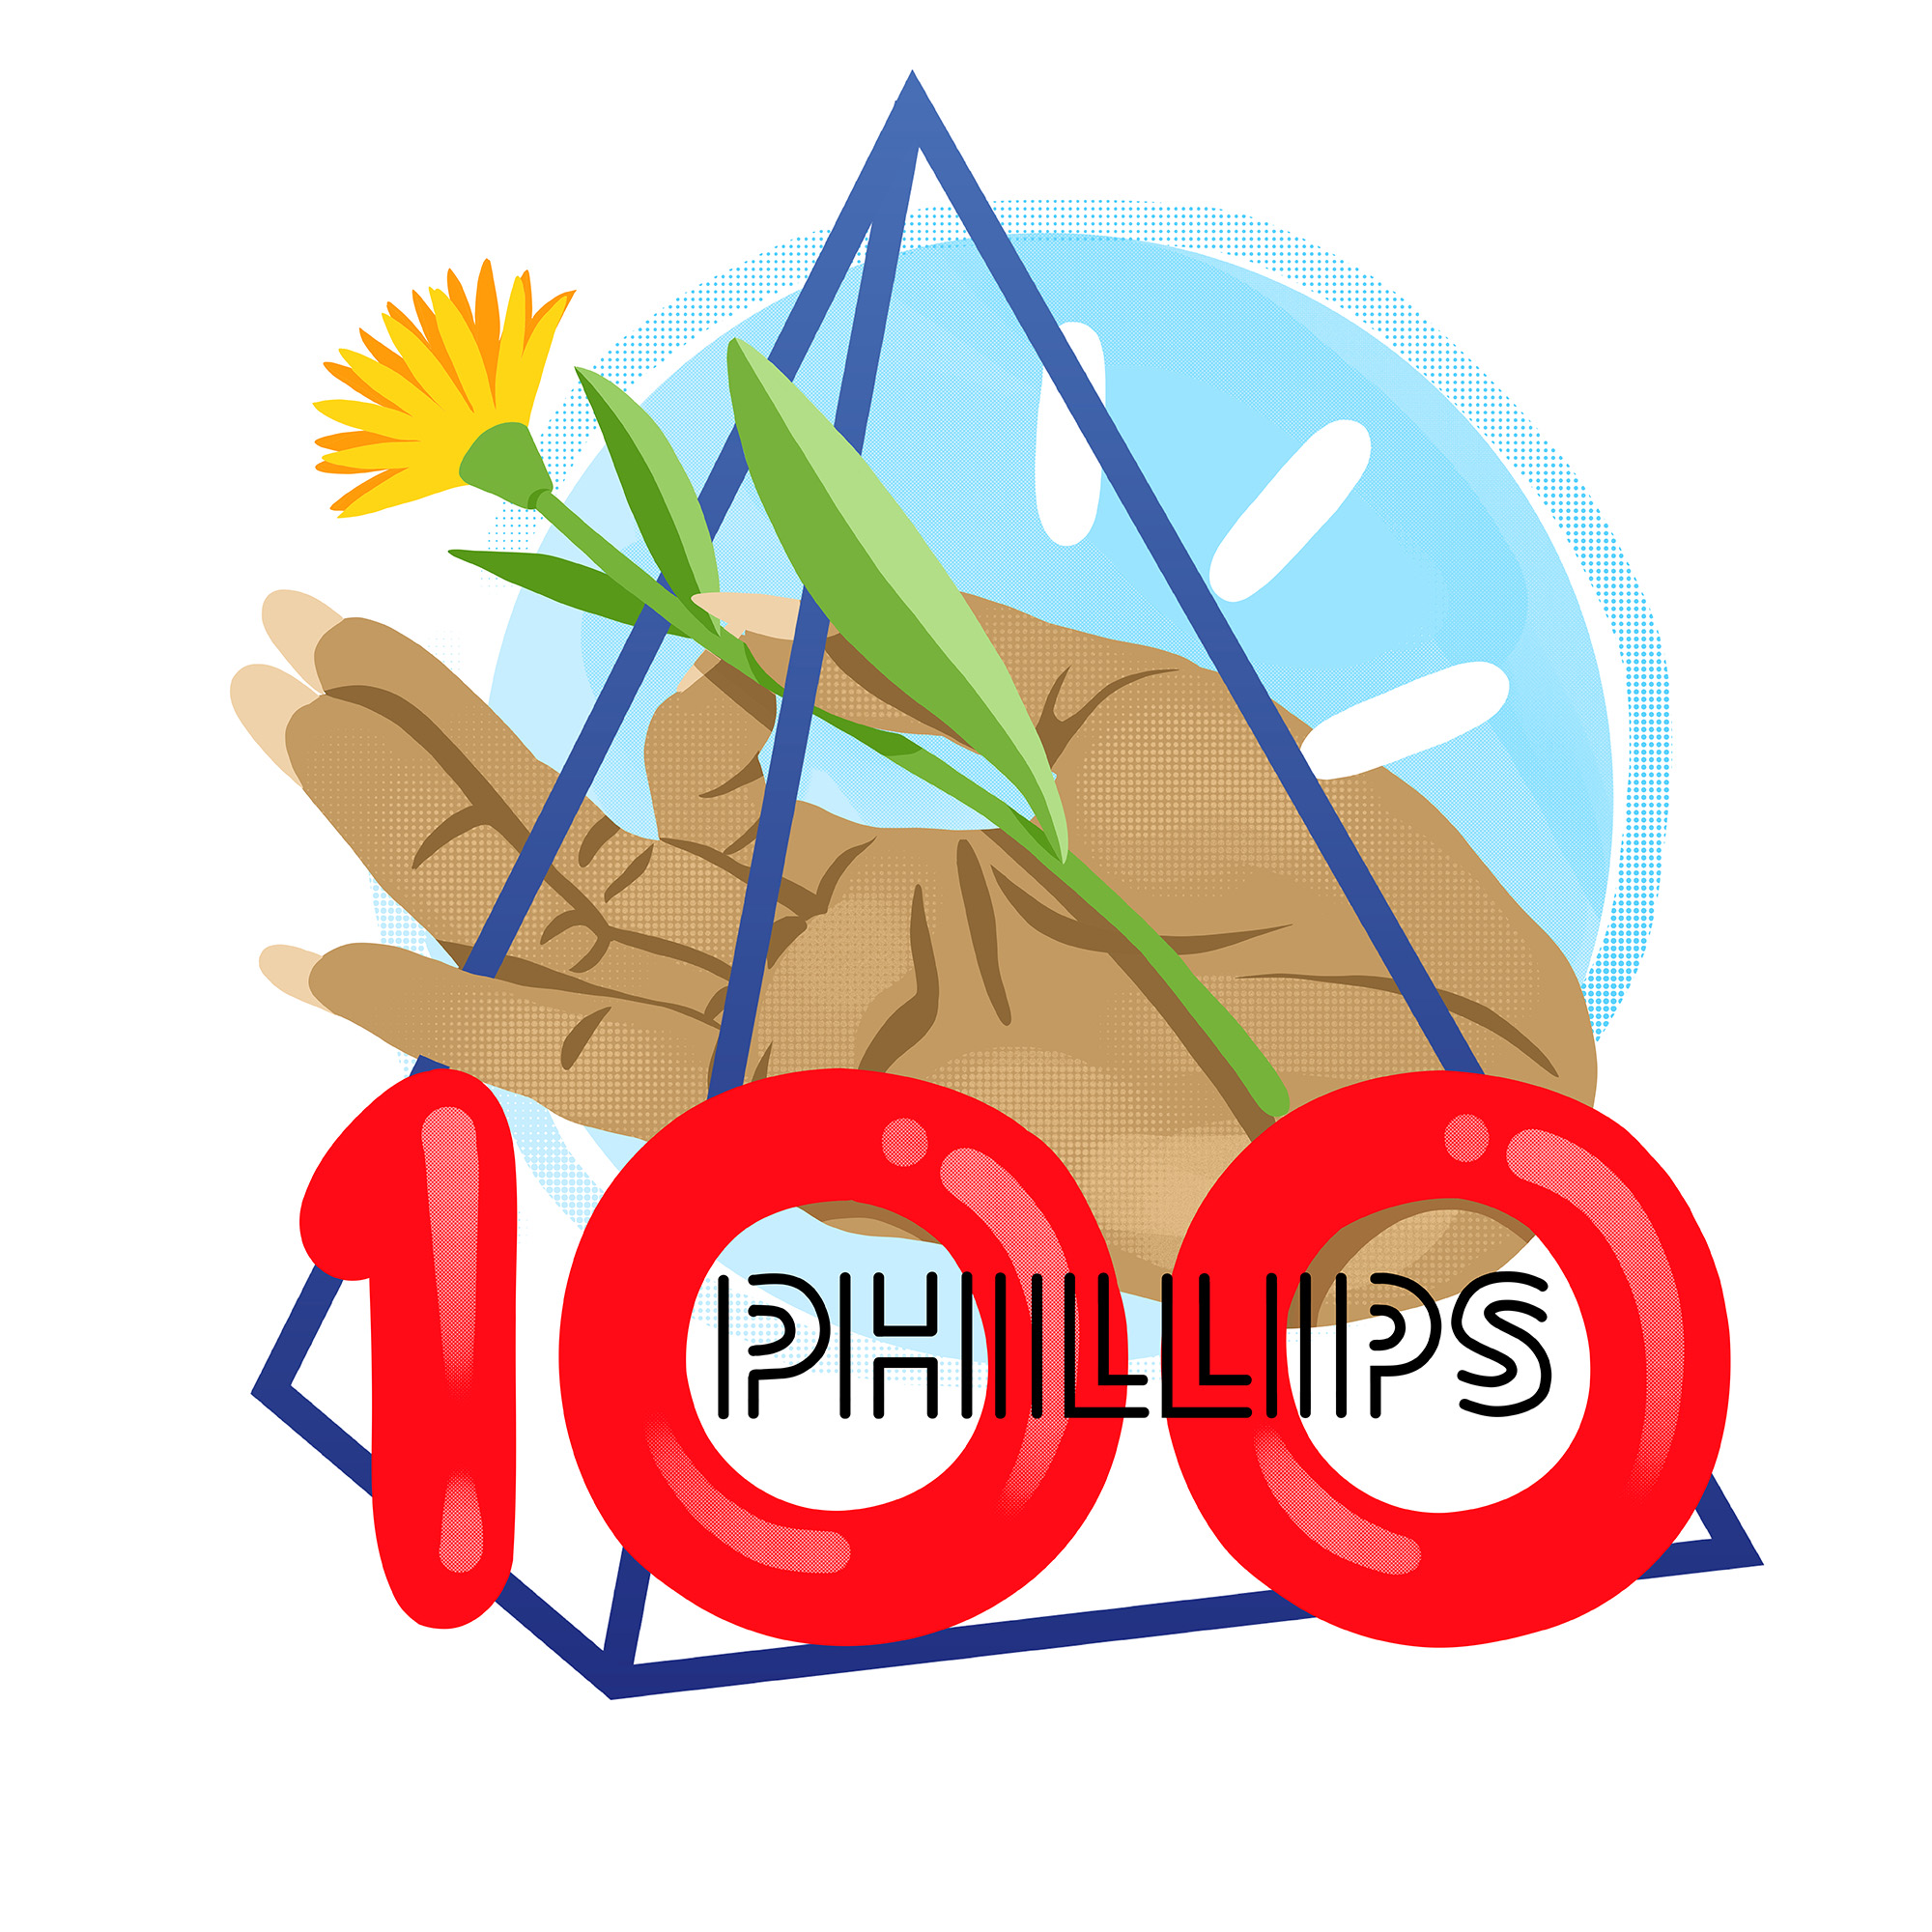 Phillips centennial logo in red with a hand holding a yellow flower inside a blue geometric shape